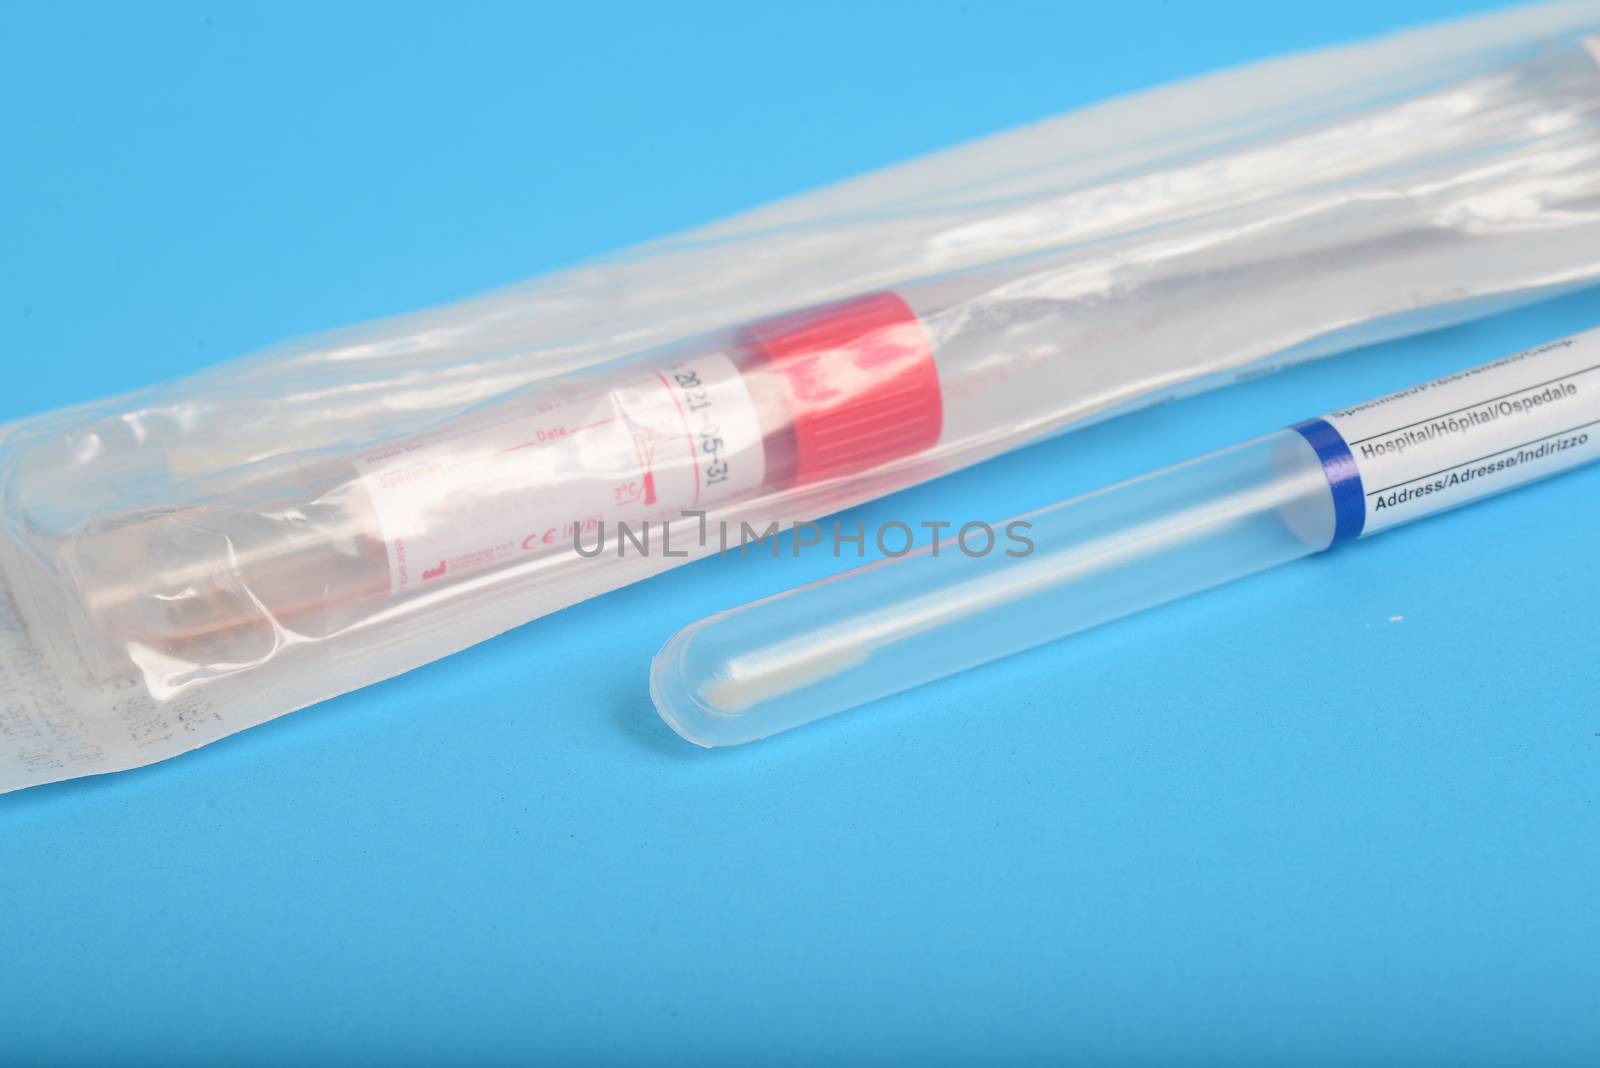 Universal Transport Medium for Viruses, Chlamydia, Mycoplasma and Ureaplasma and swab for nasopharyngeal sample collection, For respiratory virus detection for covid-19 by ideation90